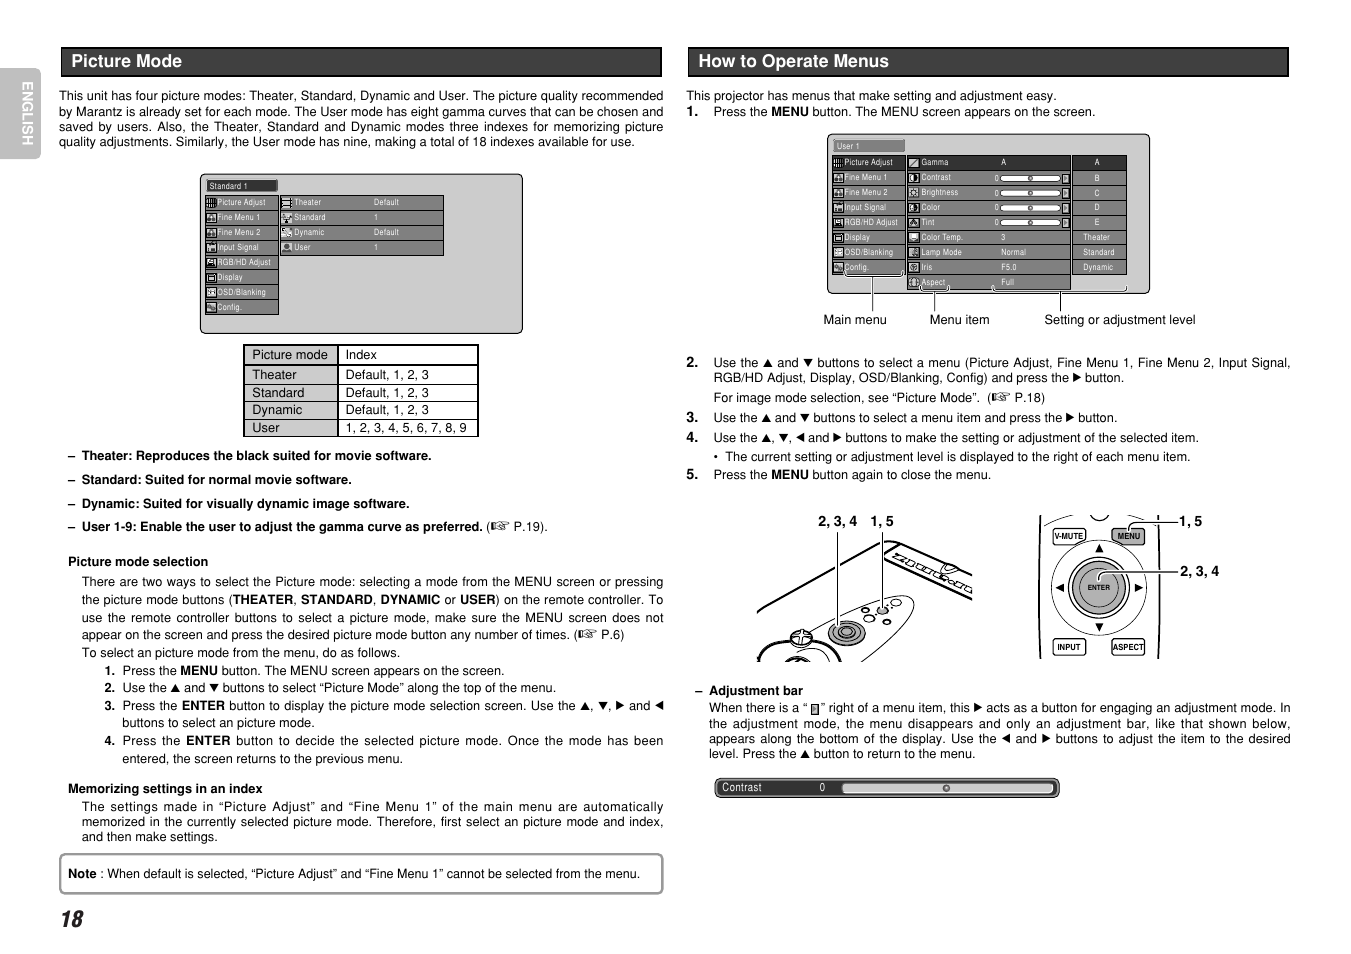 How to operate menus, Picture mode | Marantz VP-12S4 User Manual | Page 24 / 37